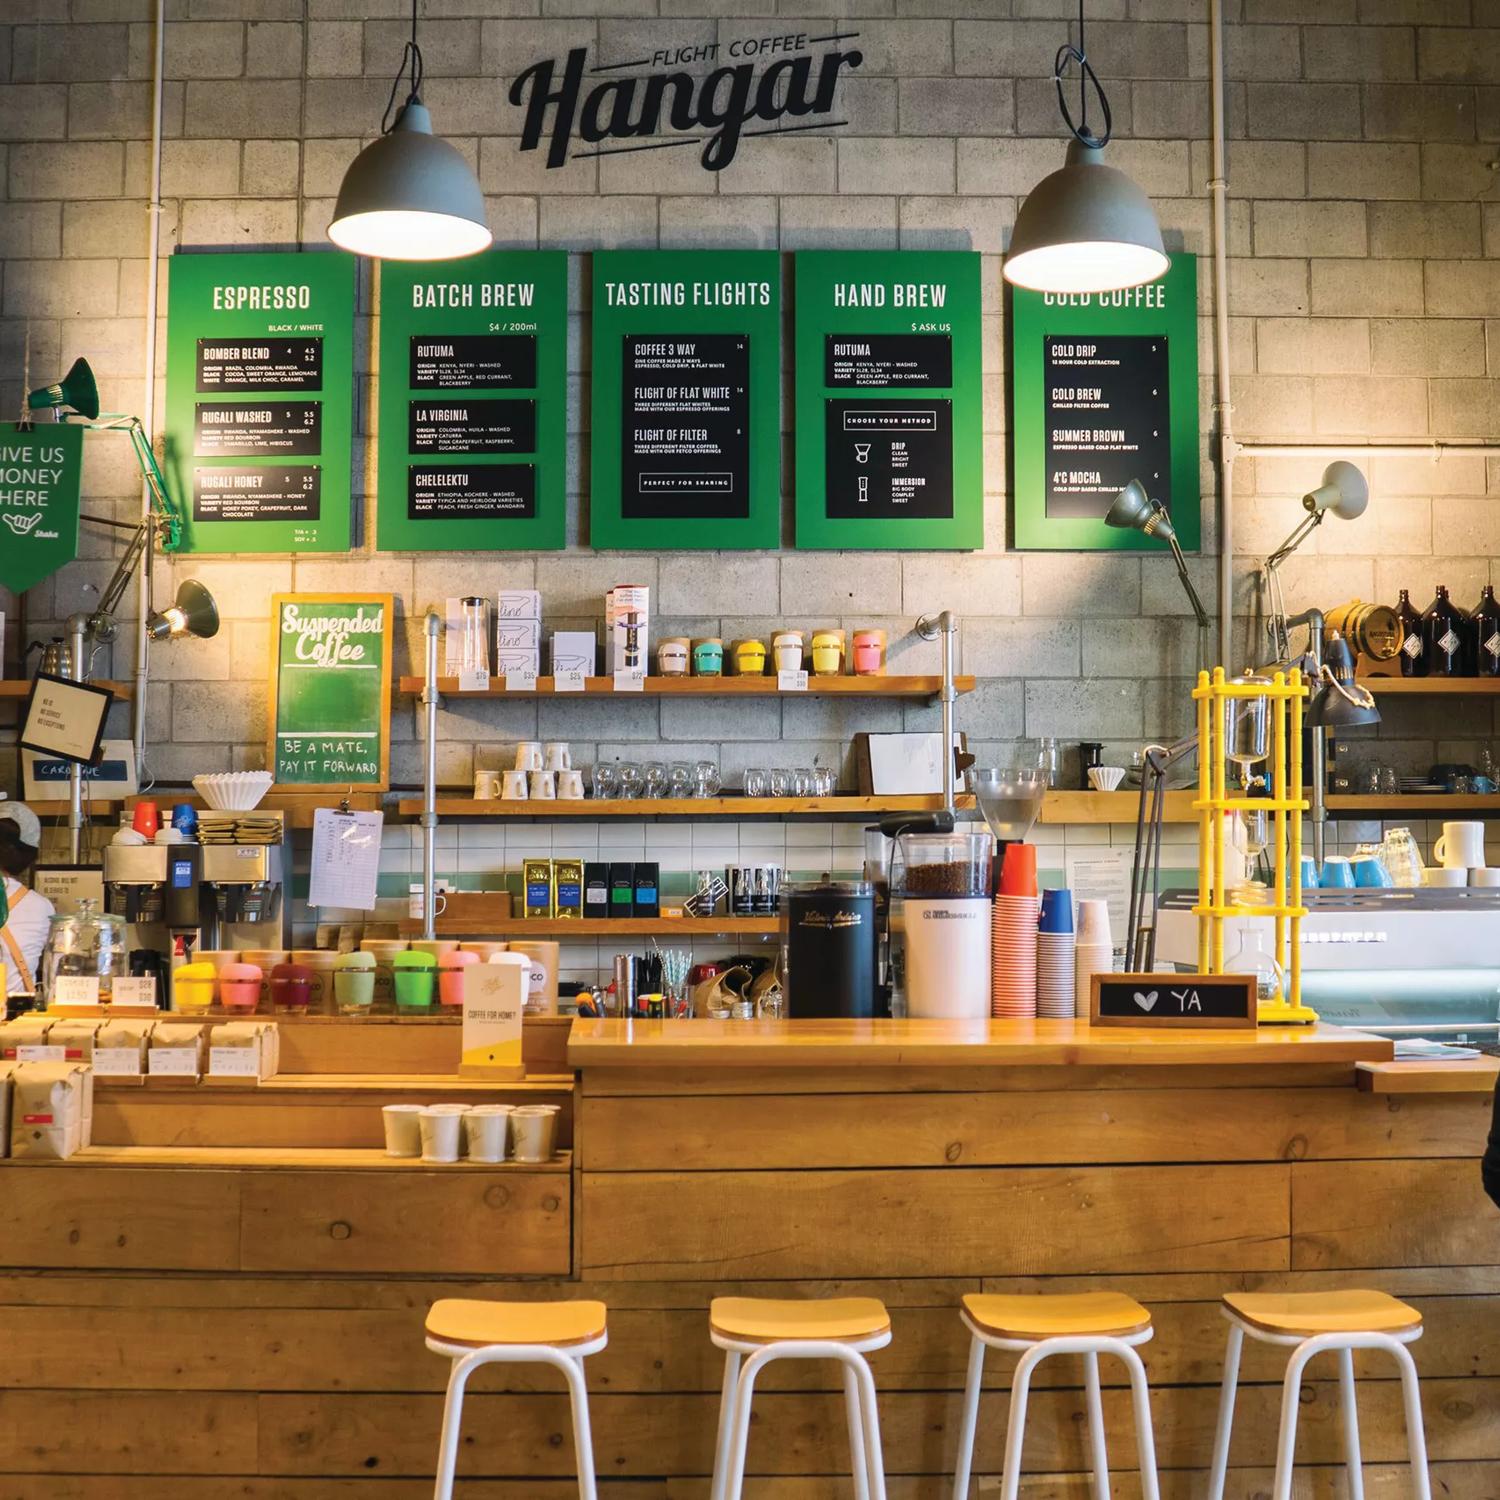 The front counter at The Hangar, made of wood with wooden stools and green menu boards on the wall, underneath their logo.